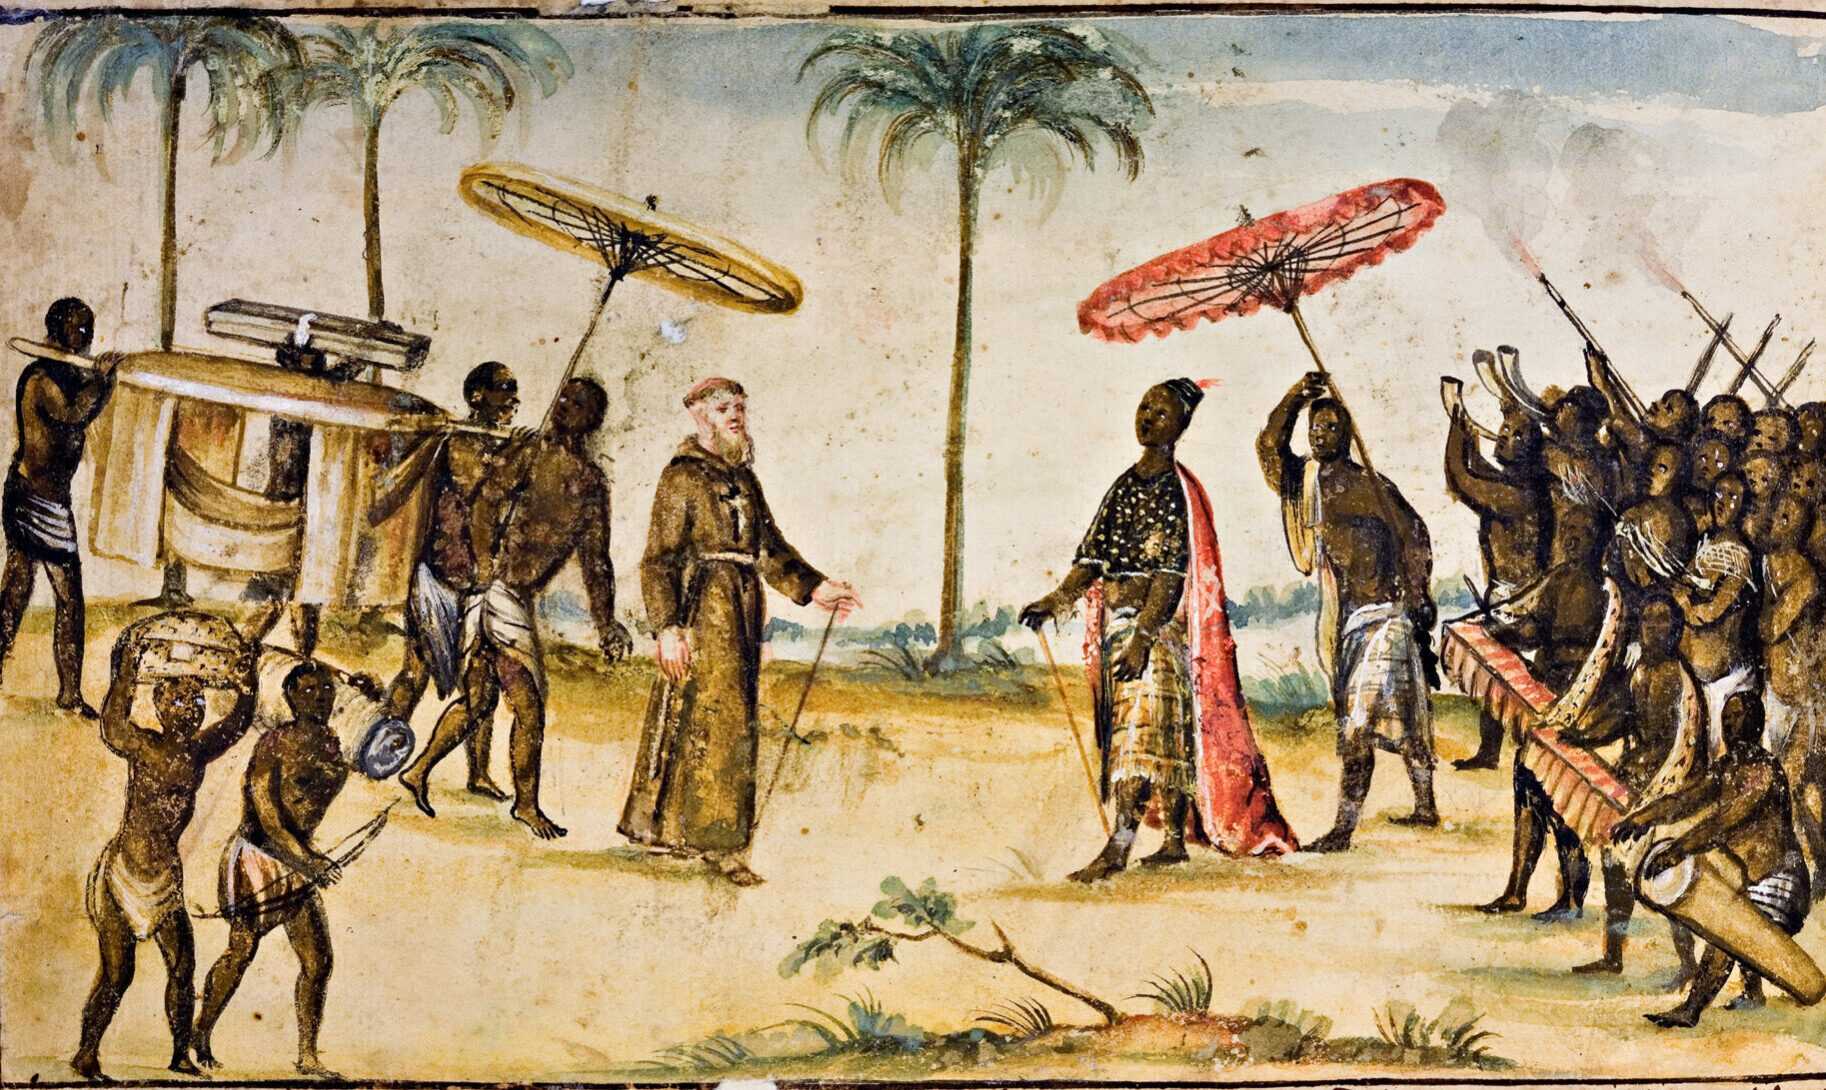 An watercolored illustration of a catholic missionary meeting the king and tribe standing behind them..